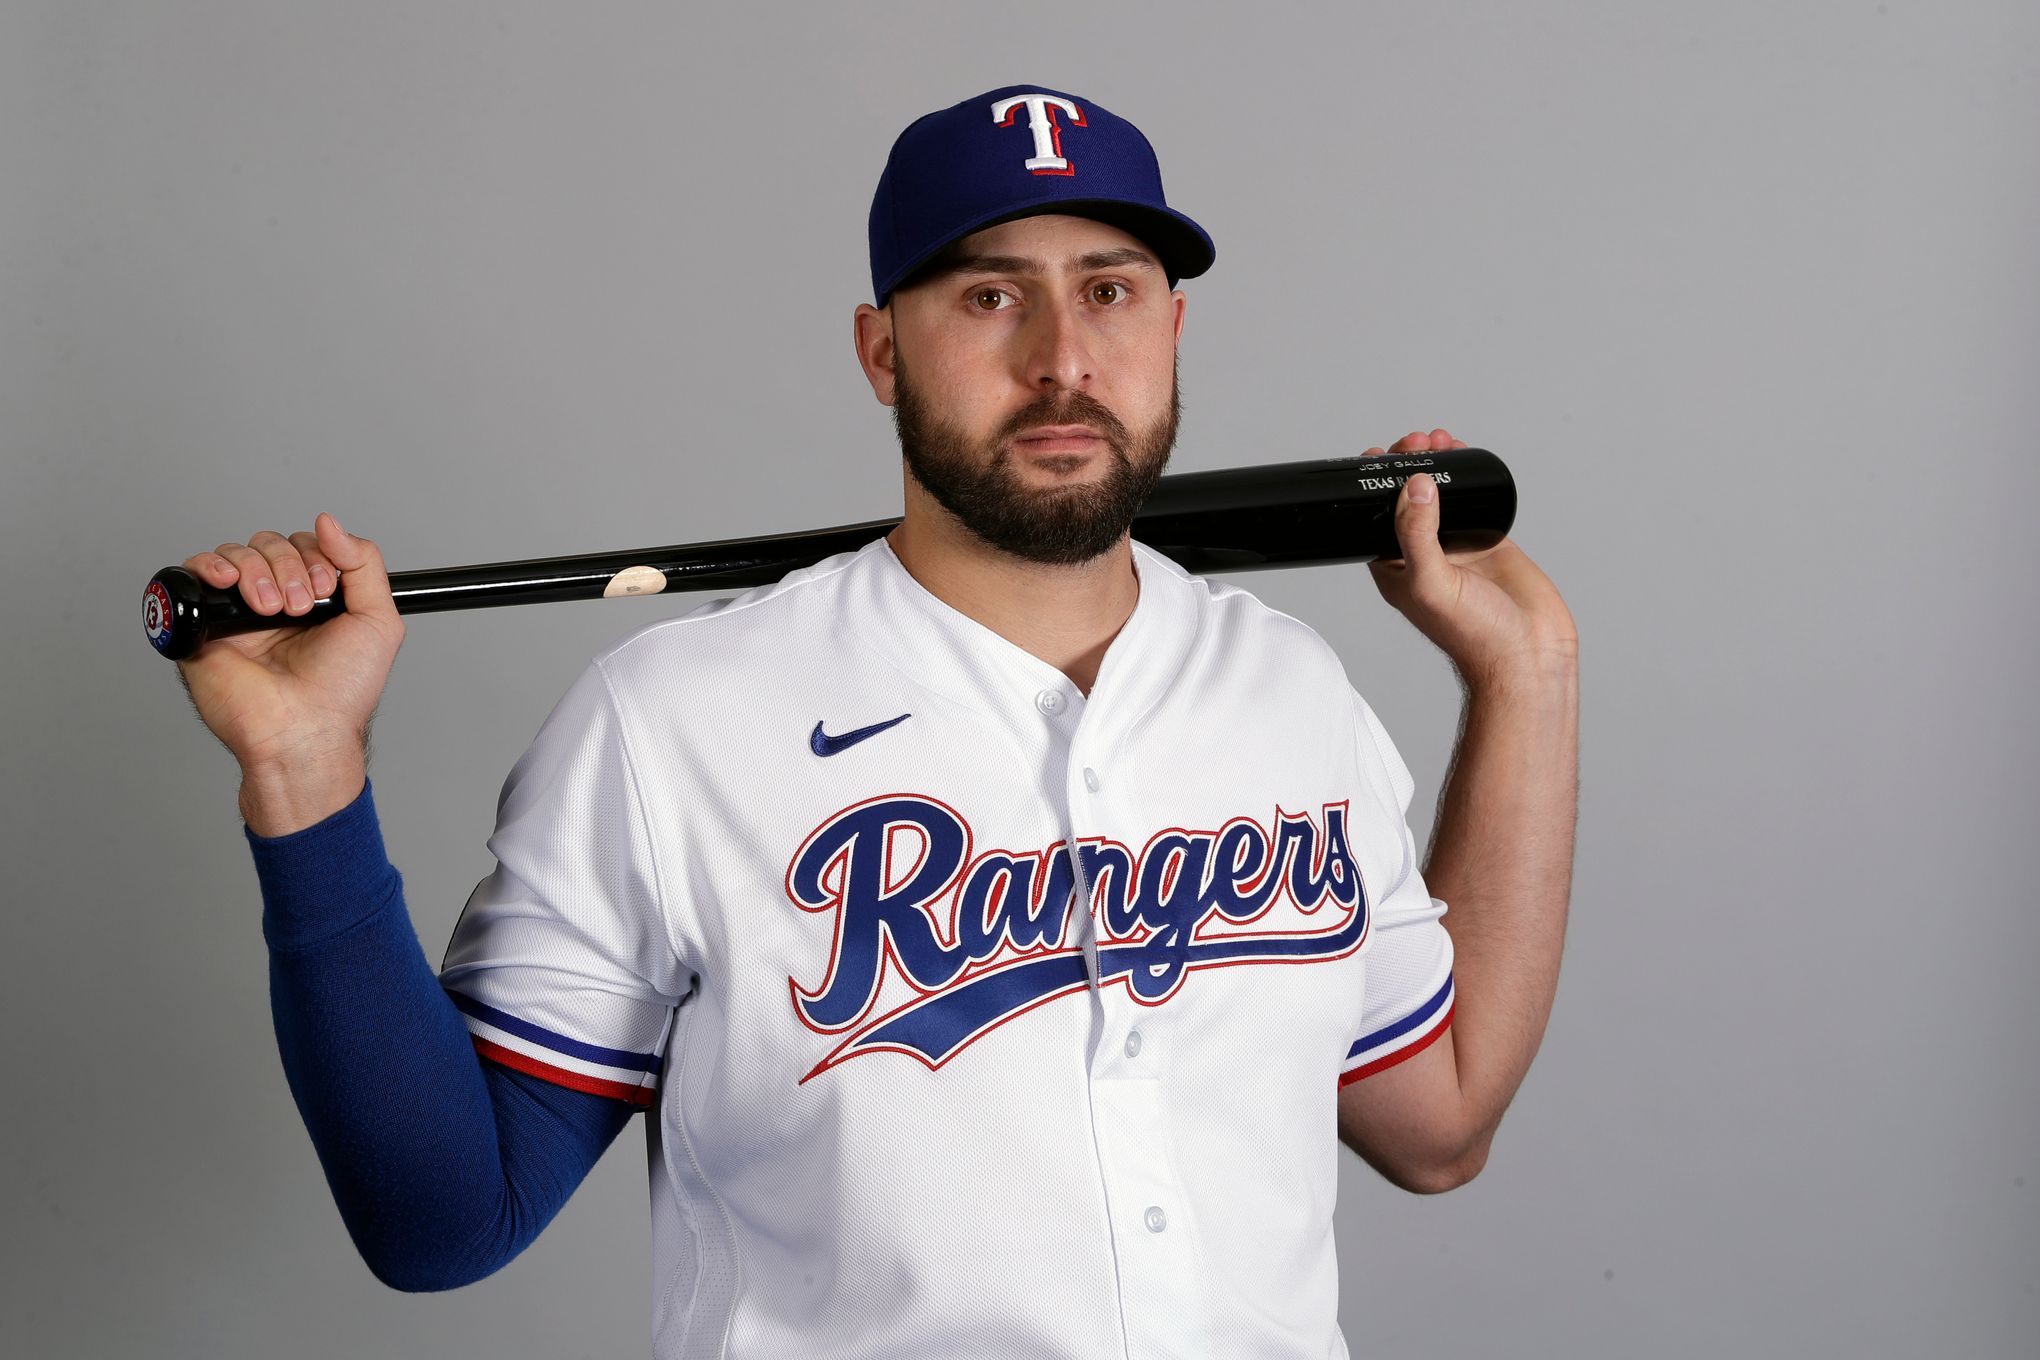 Joey Gallo wins 2021 Gold Glove Award for right field